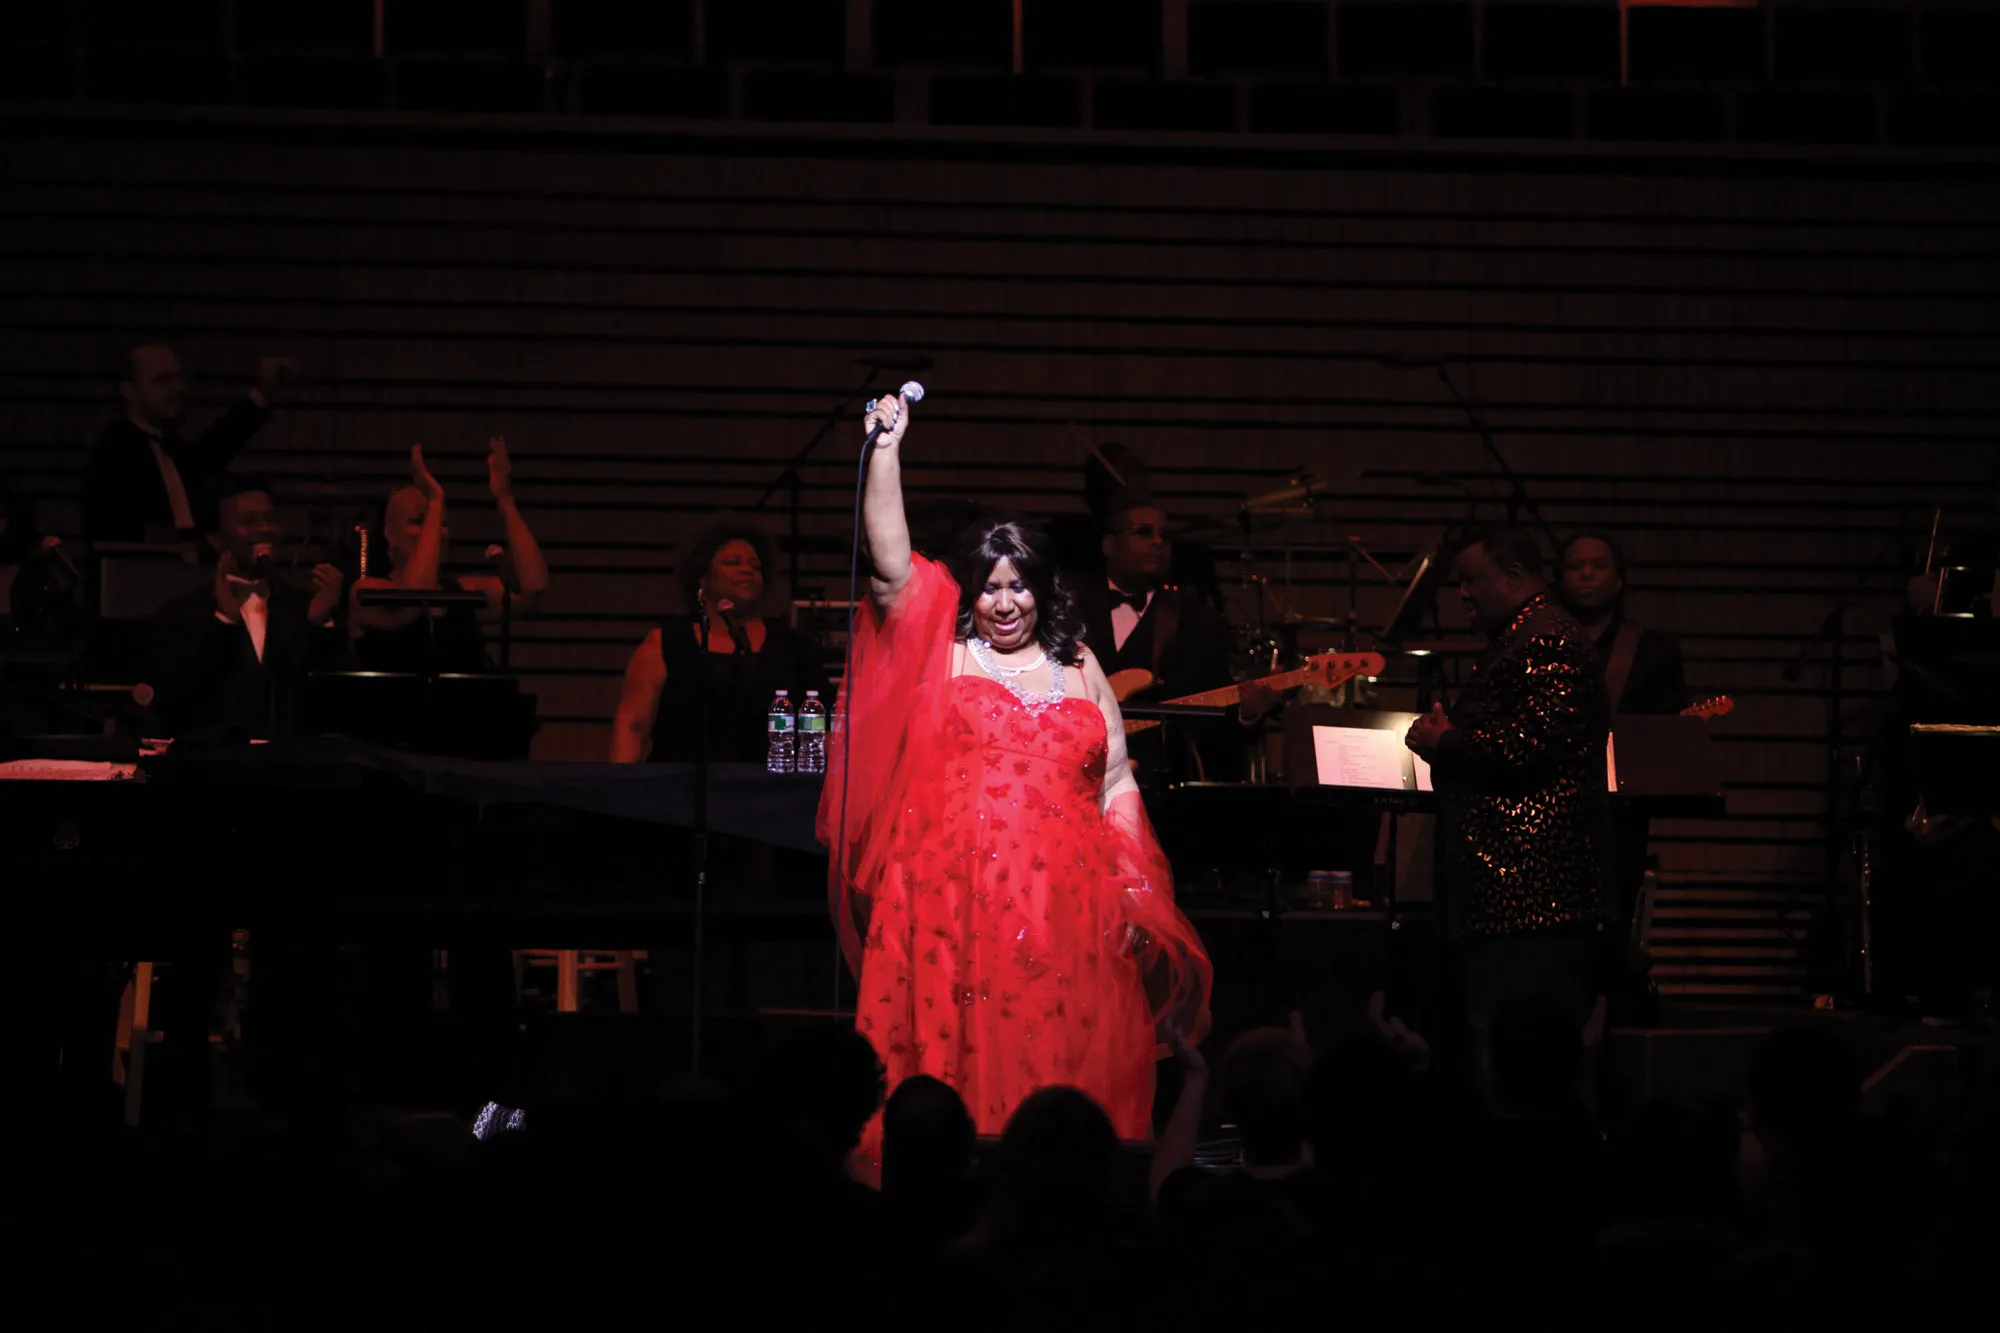 Aretha Franklin dressed in red holding up a mic during a performance in the concert hall. 